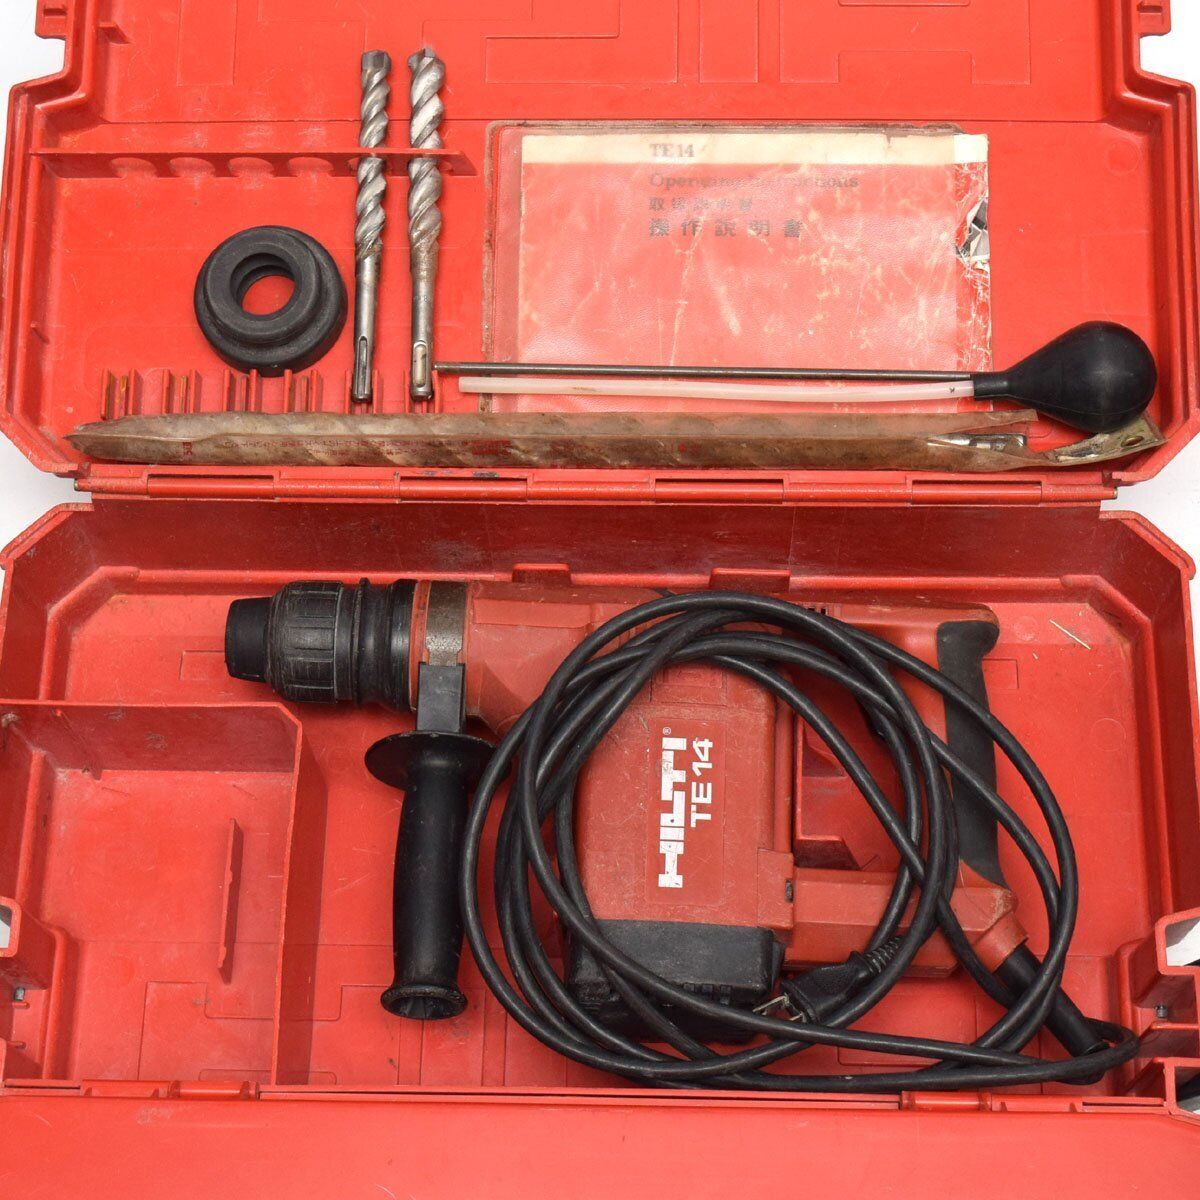 HILTI TE14 Rotary Hammer Drill w/ Case Tested from Japan